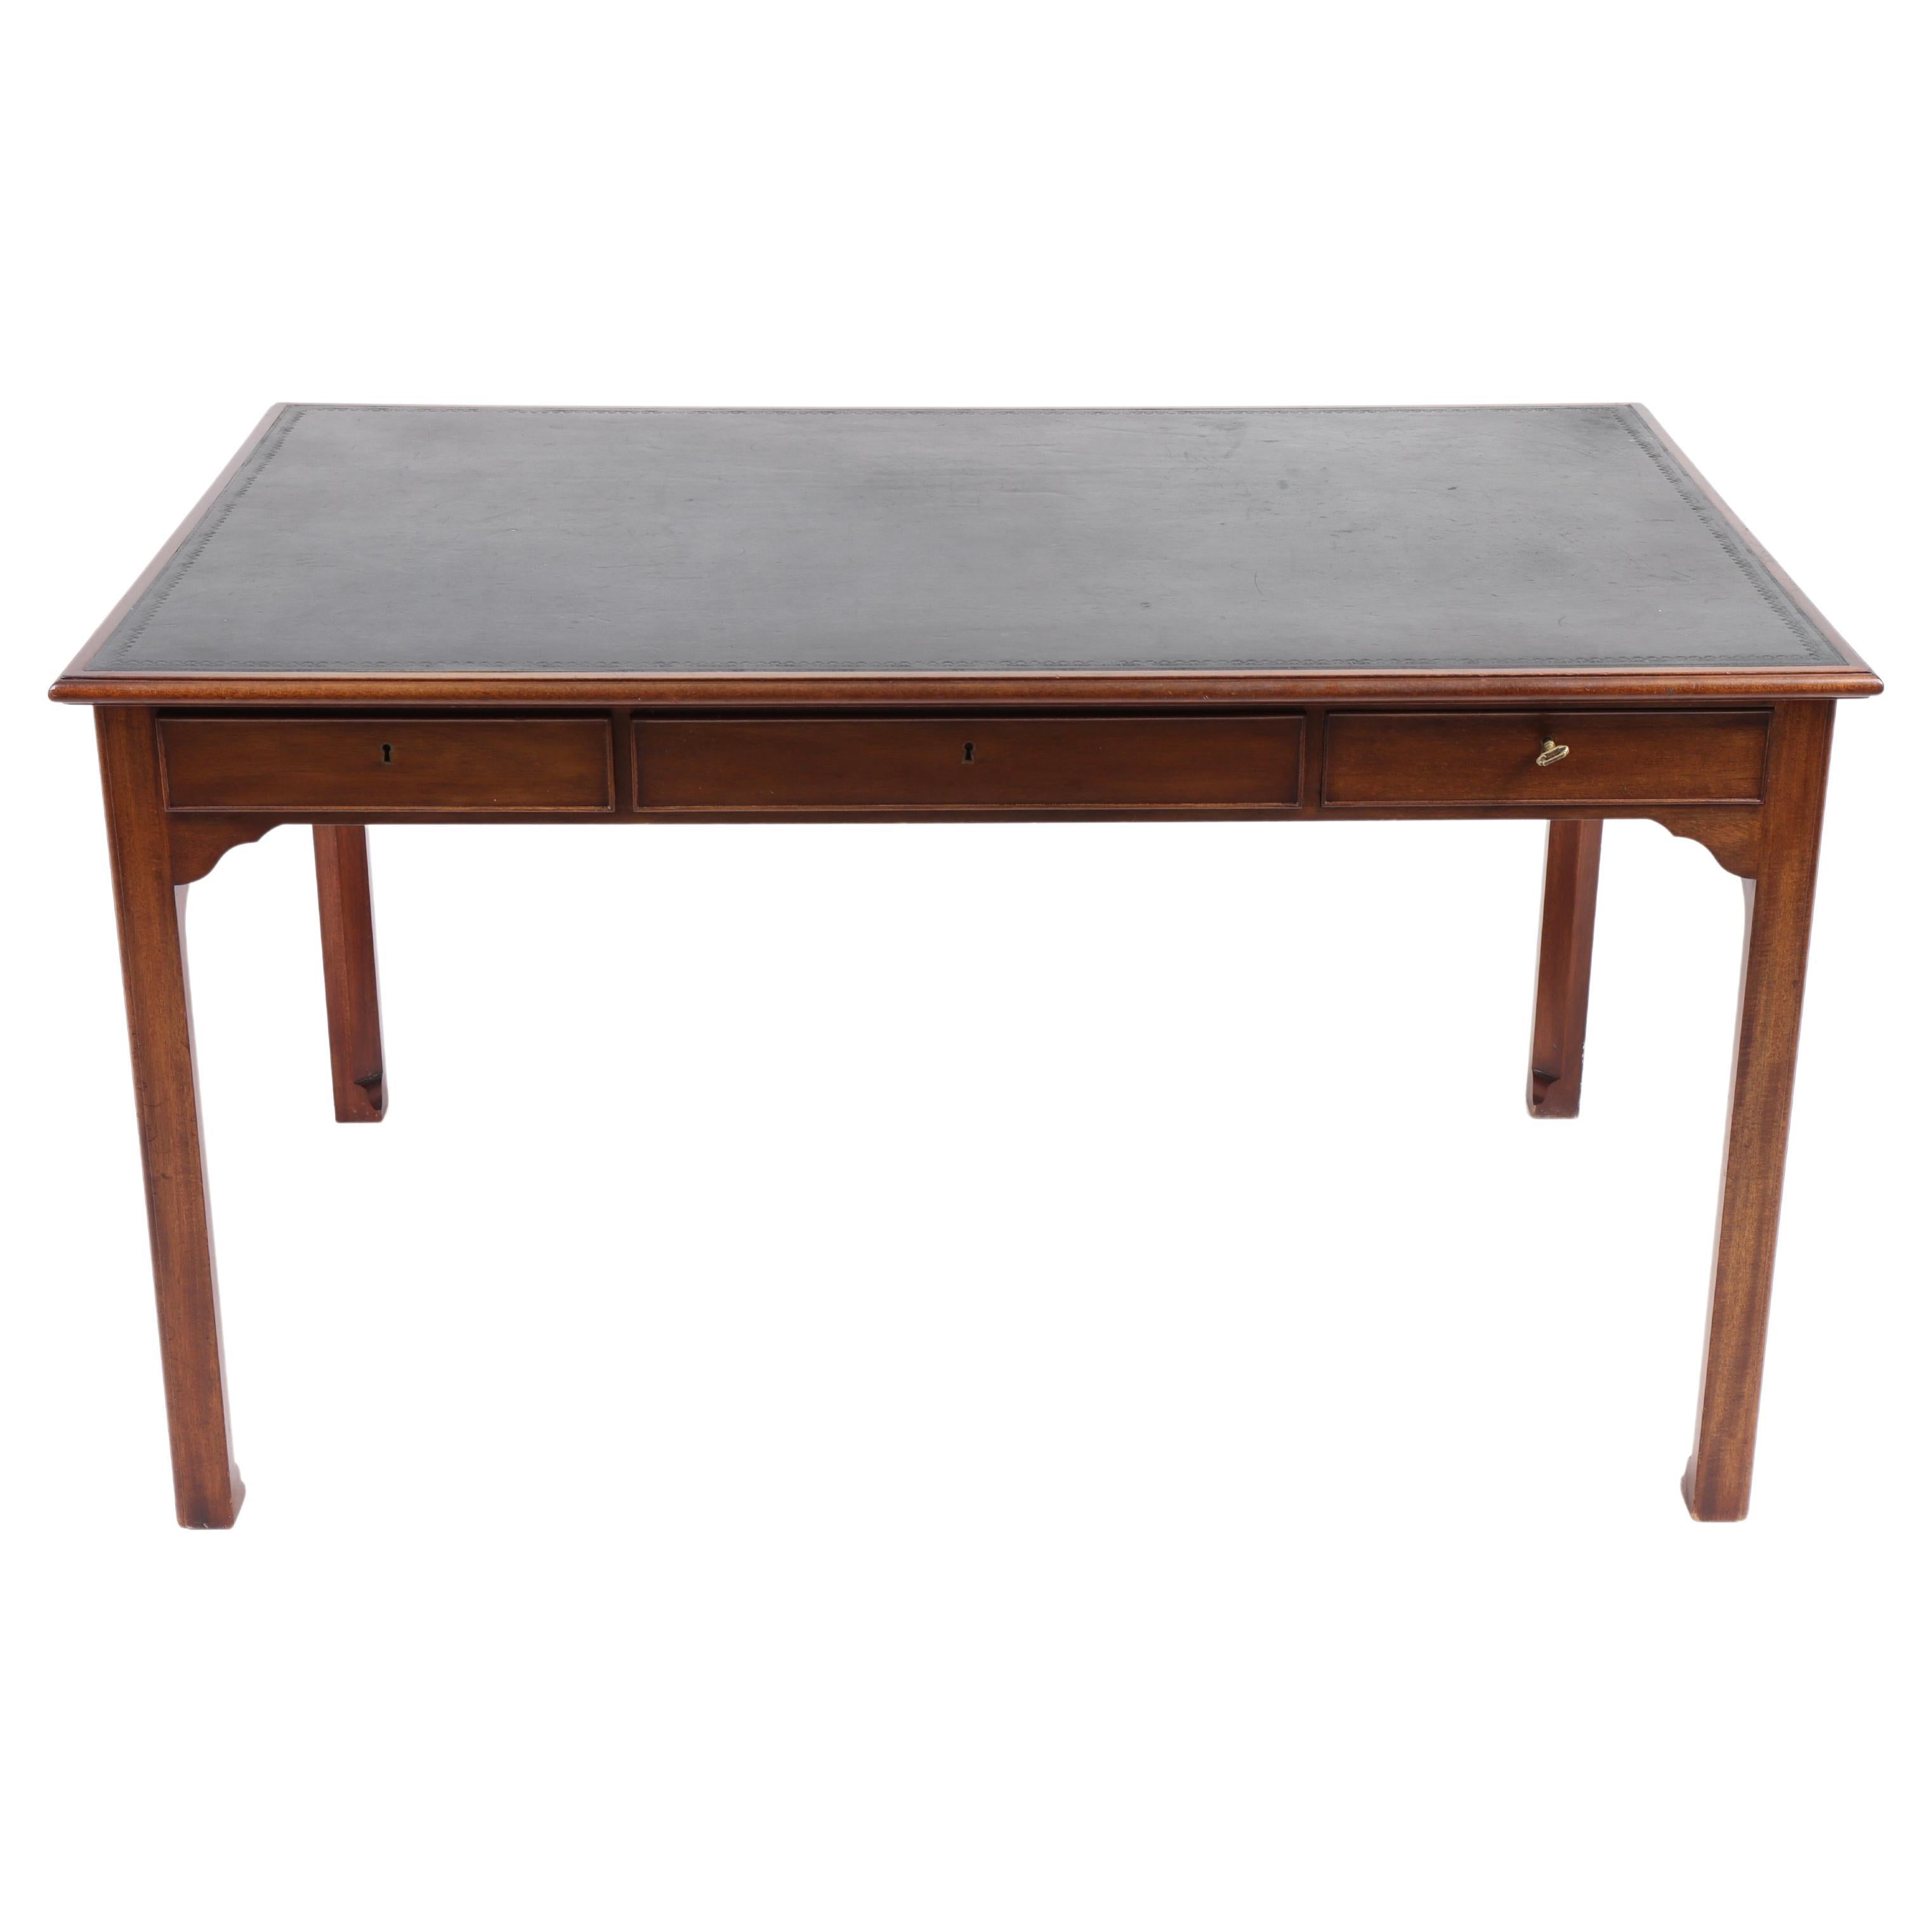 Desk in Mahogany and Patinated Leather, Made in Denmark, 1950s